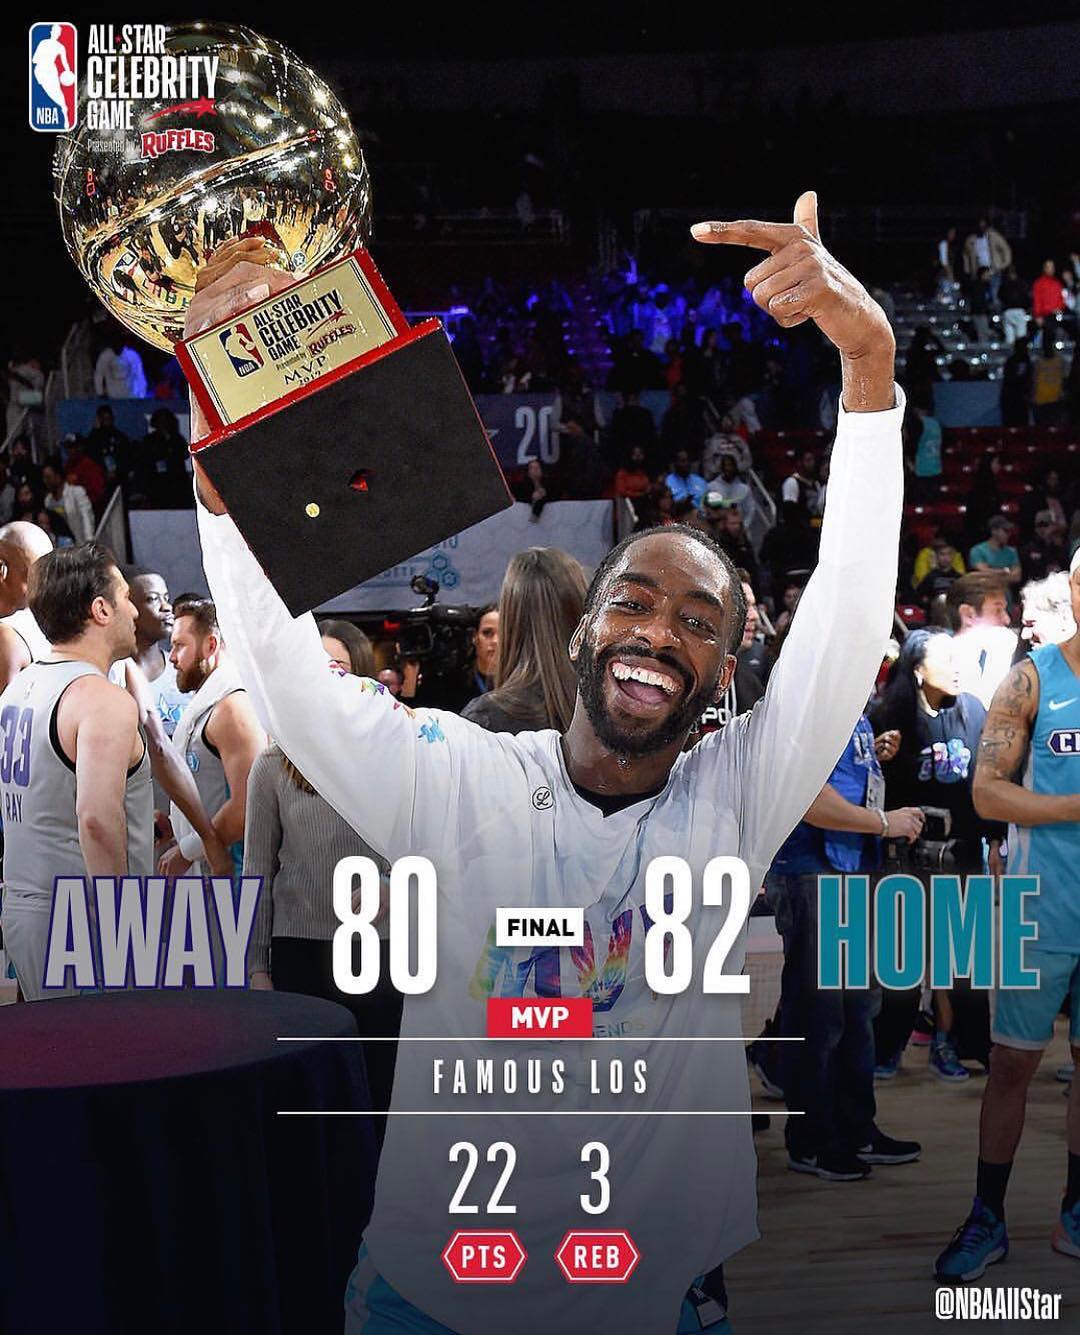 The Source Famous Los Wins Mvp In Nba All Star Celebrity Game